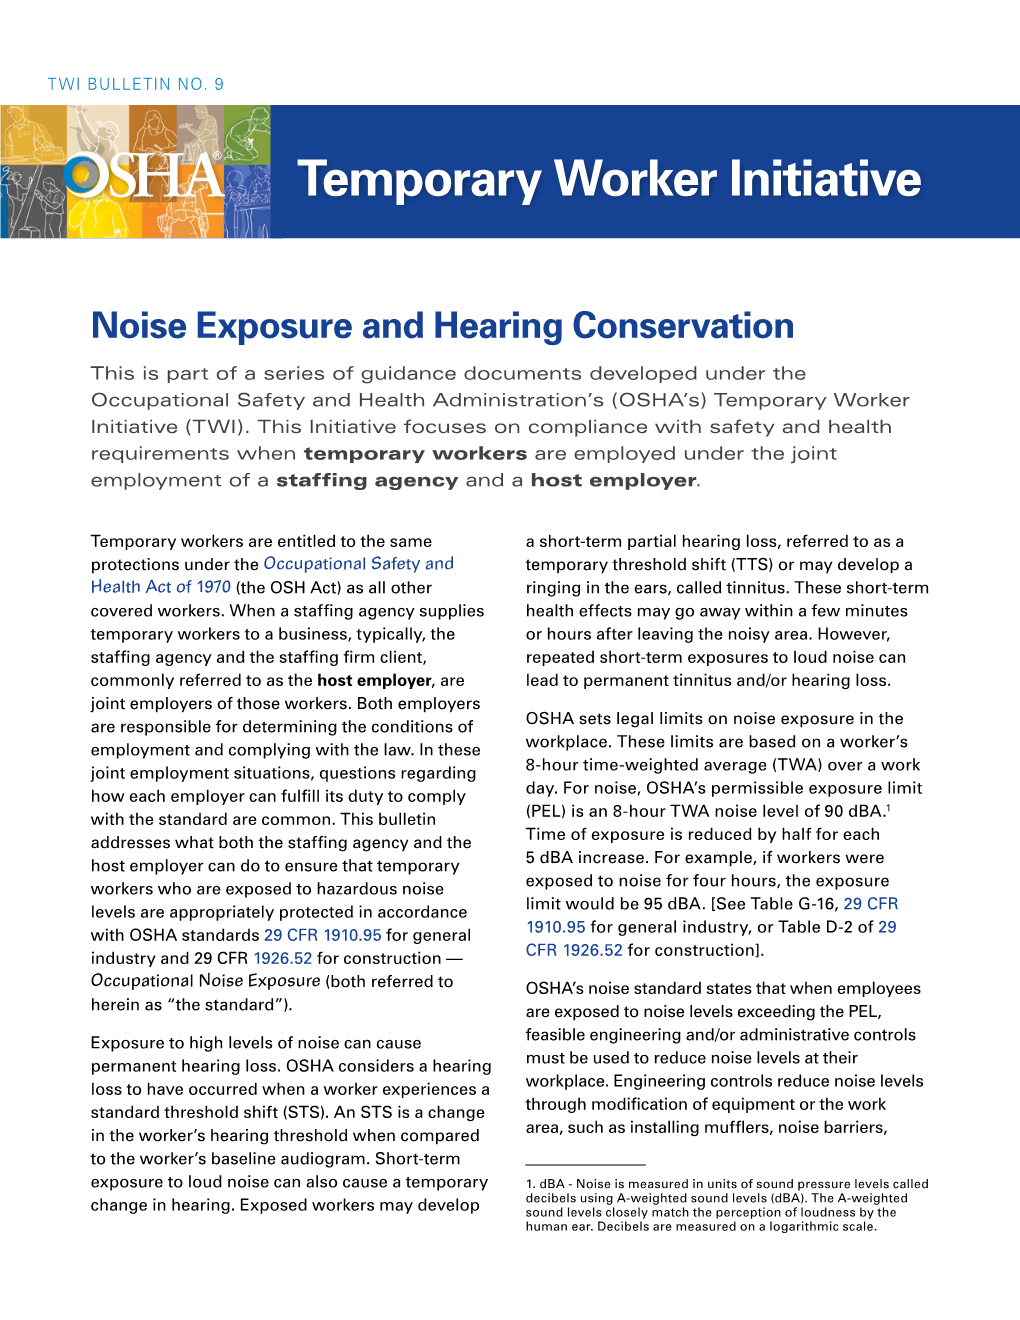 Noise Exposure and Hearing Conservation